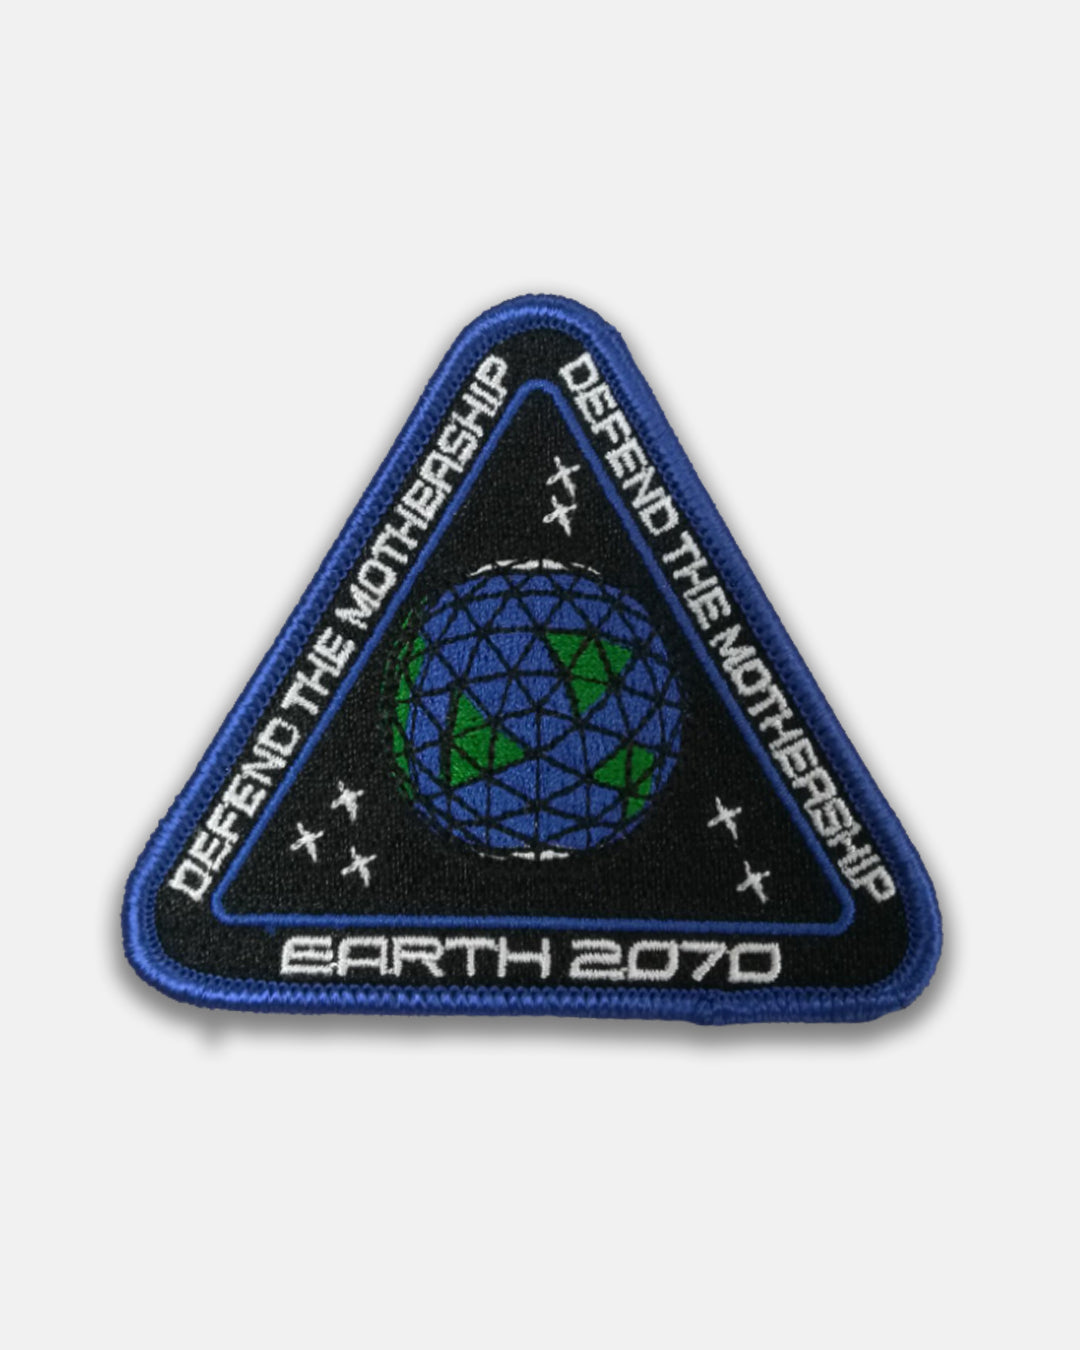 EARTH 2070 MISSION PATCH